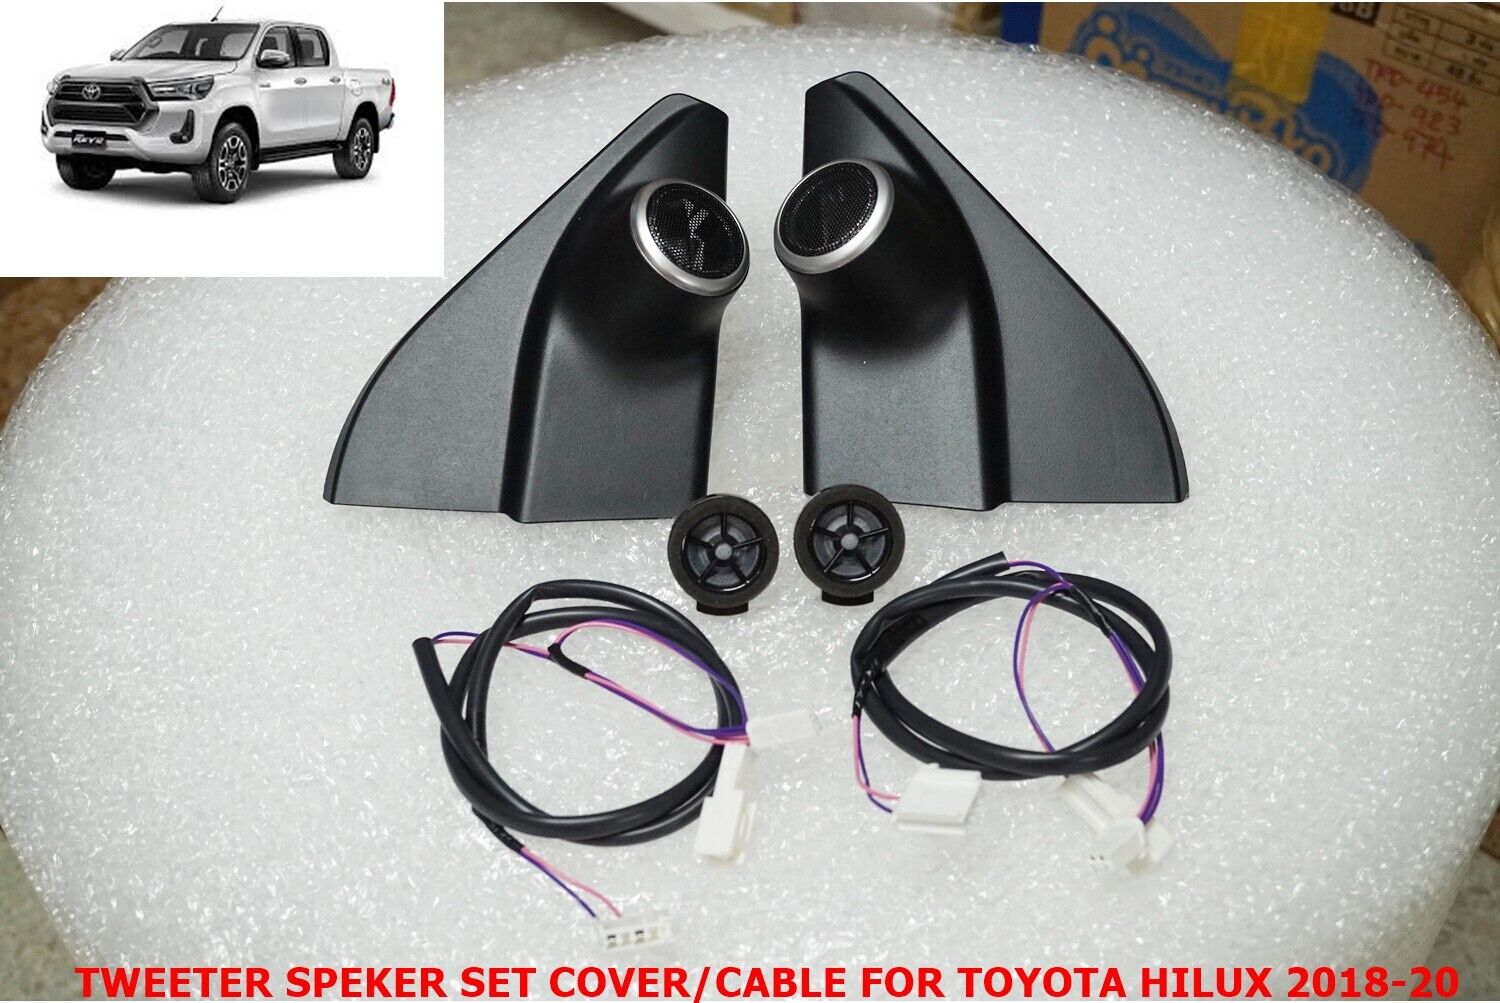 TWEETER SPEAKERS WITH COVER / PLUG & PLAY FOR TOYOTA NEW FORTUNER 2015-18 